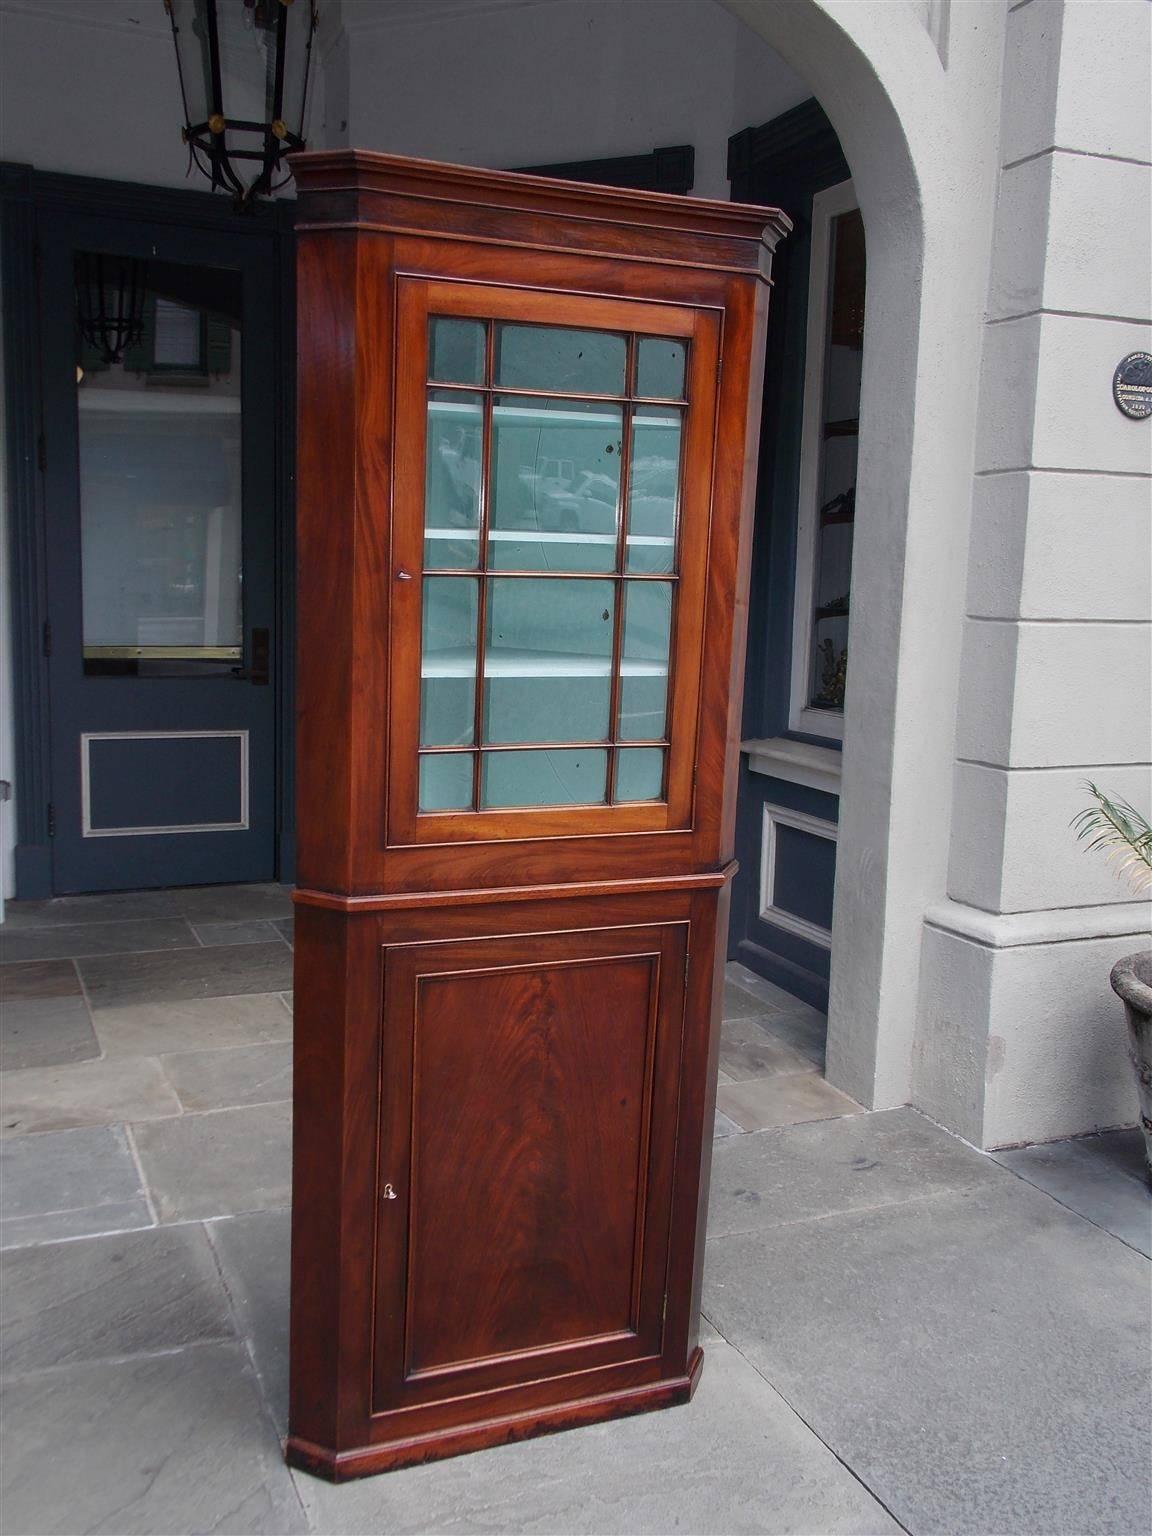 American Federal two-piece mahogany and rosewood diminutive corner cabinet with a carved molded edge cornice, upper hinged mullion glass door with three fitted interior shelves, lower hinged blind door with two fitted interior shelves, resting on